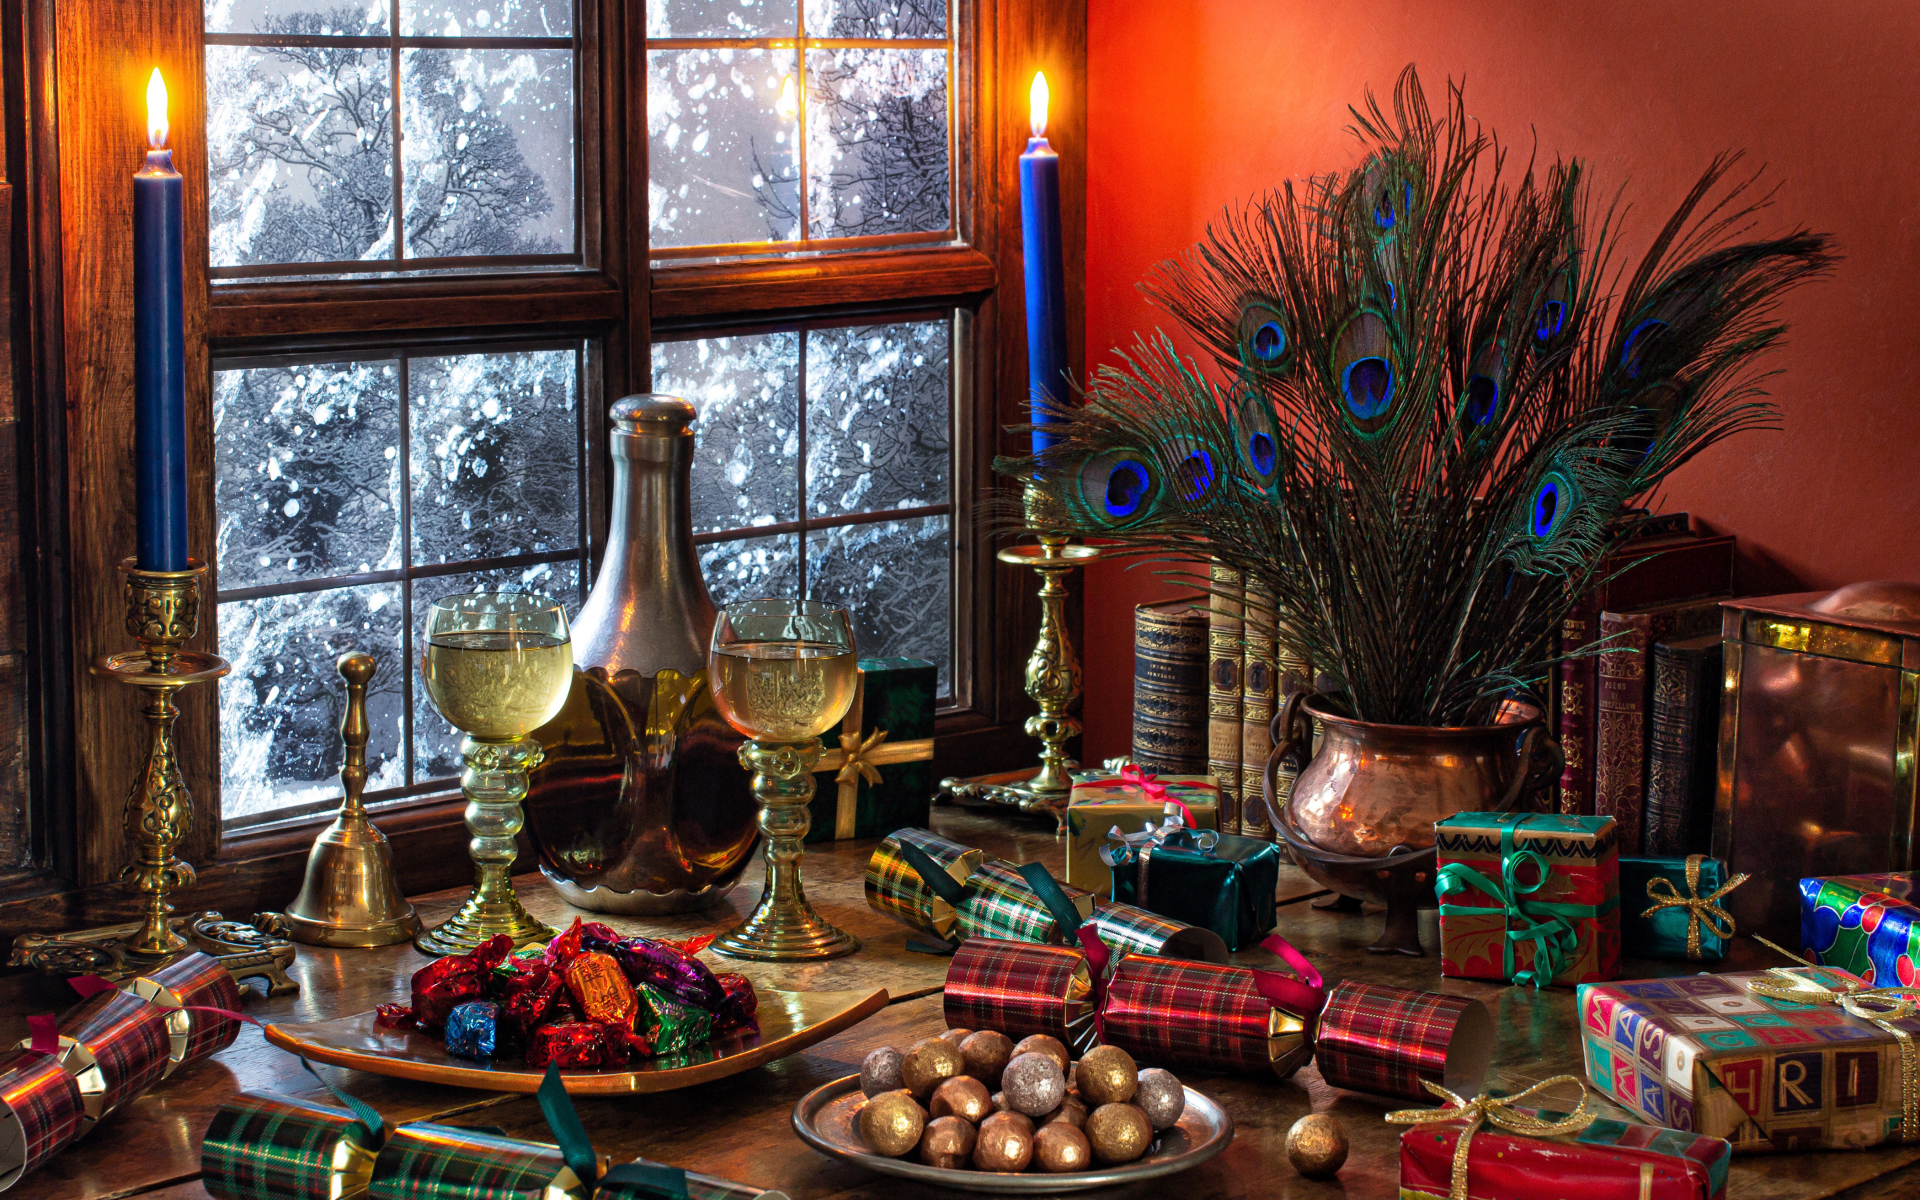 Candies, gifts and antique items on a table by the window